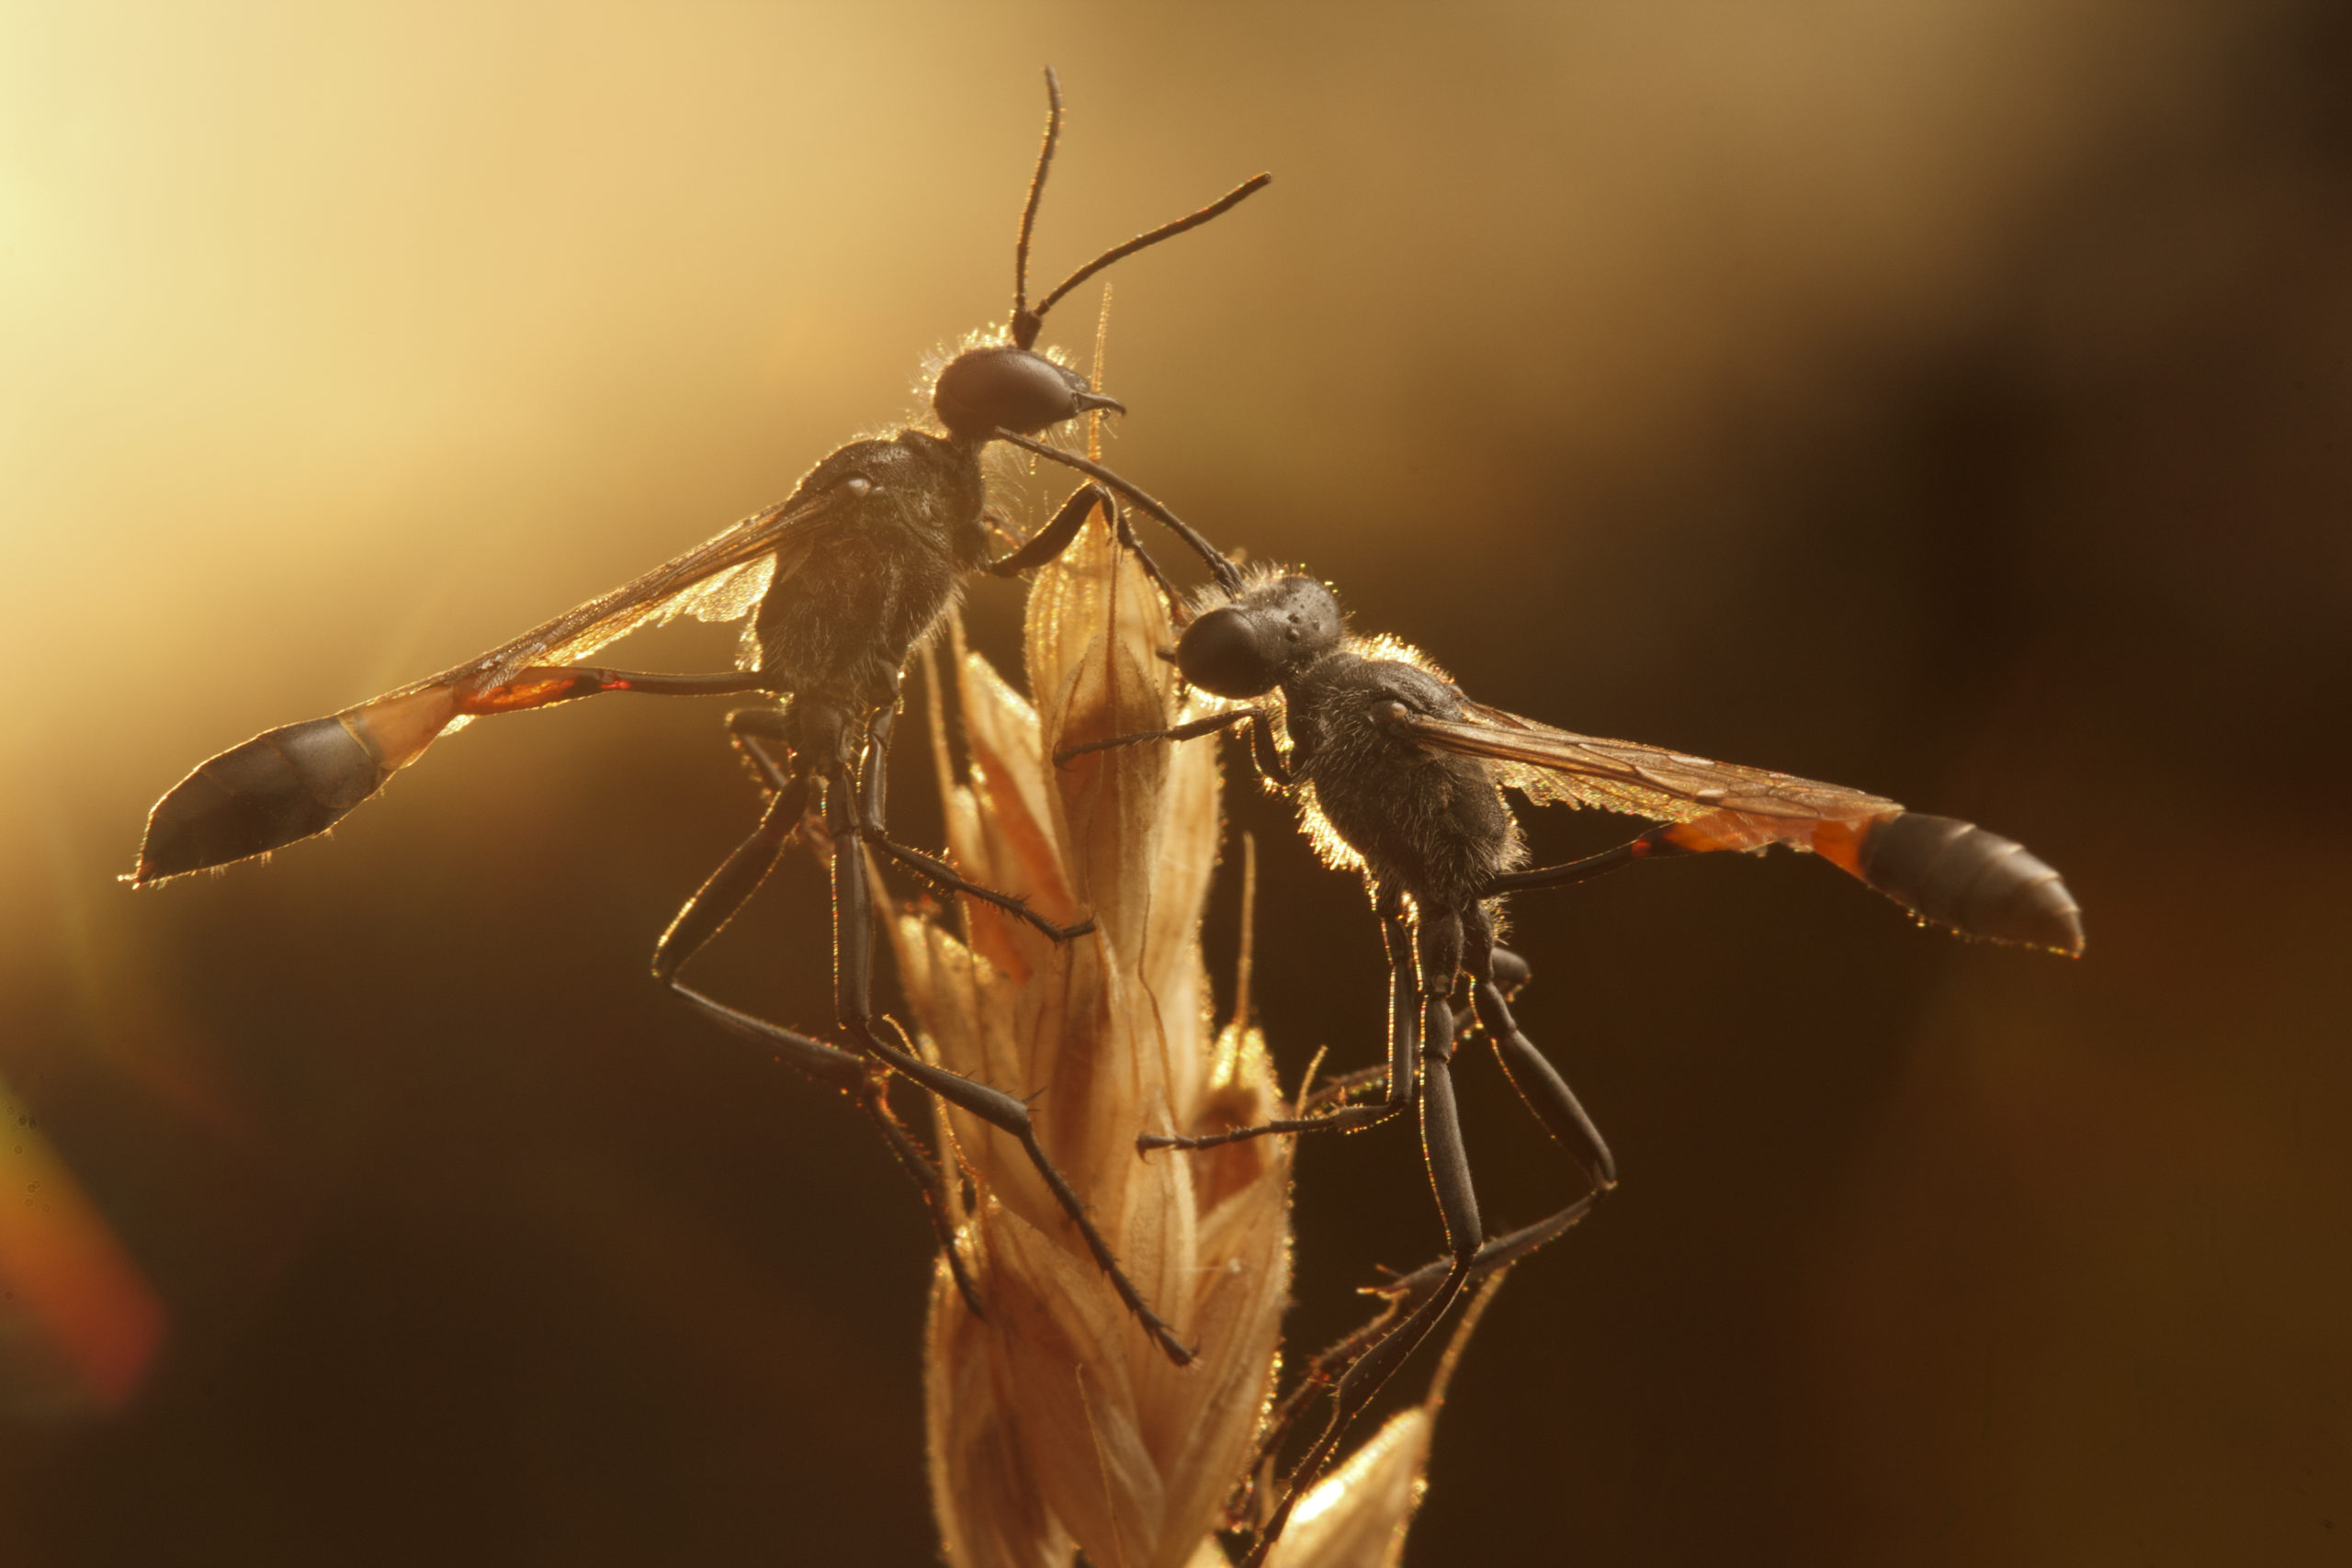 Two Ammophila wasps on dry grass at dawn